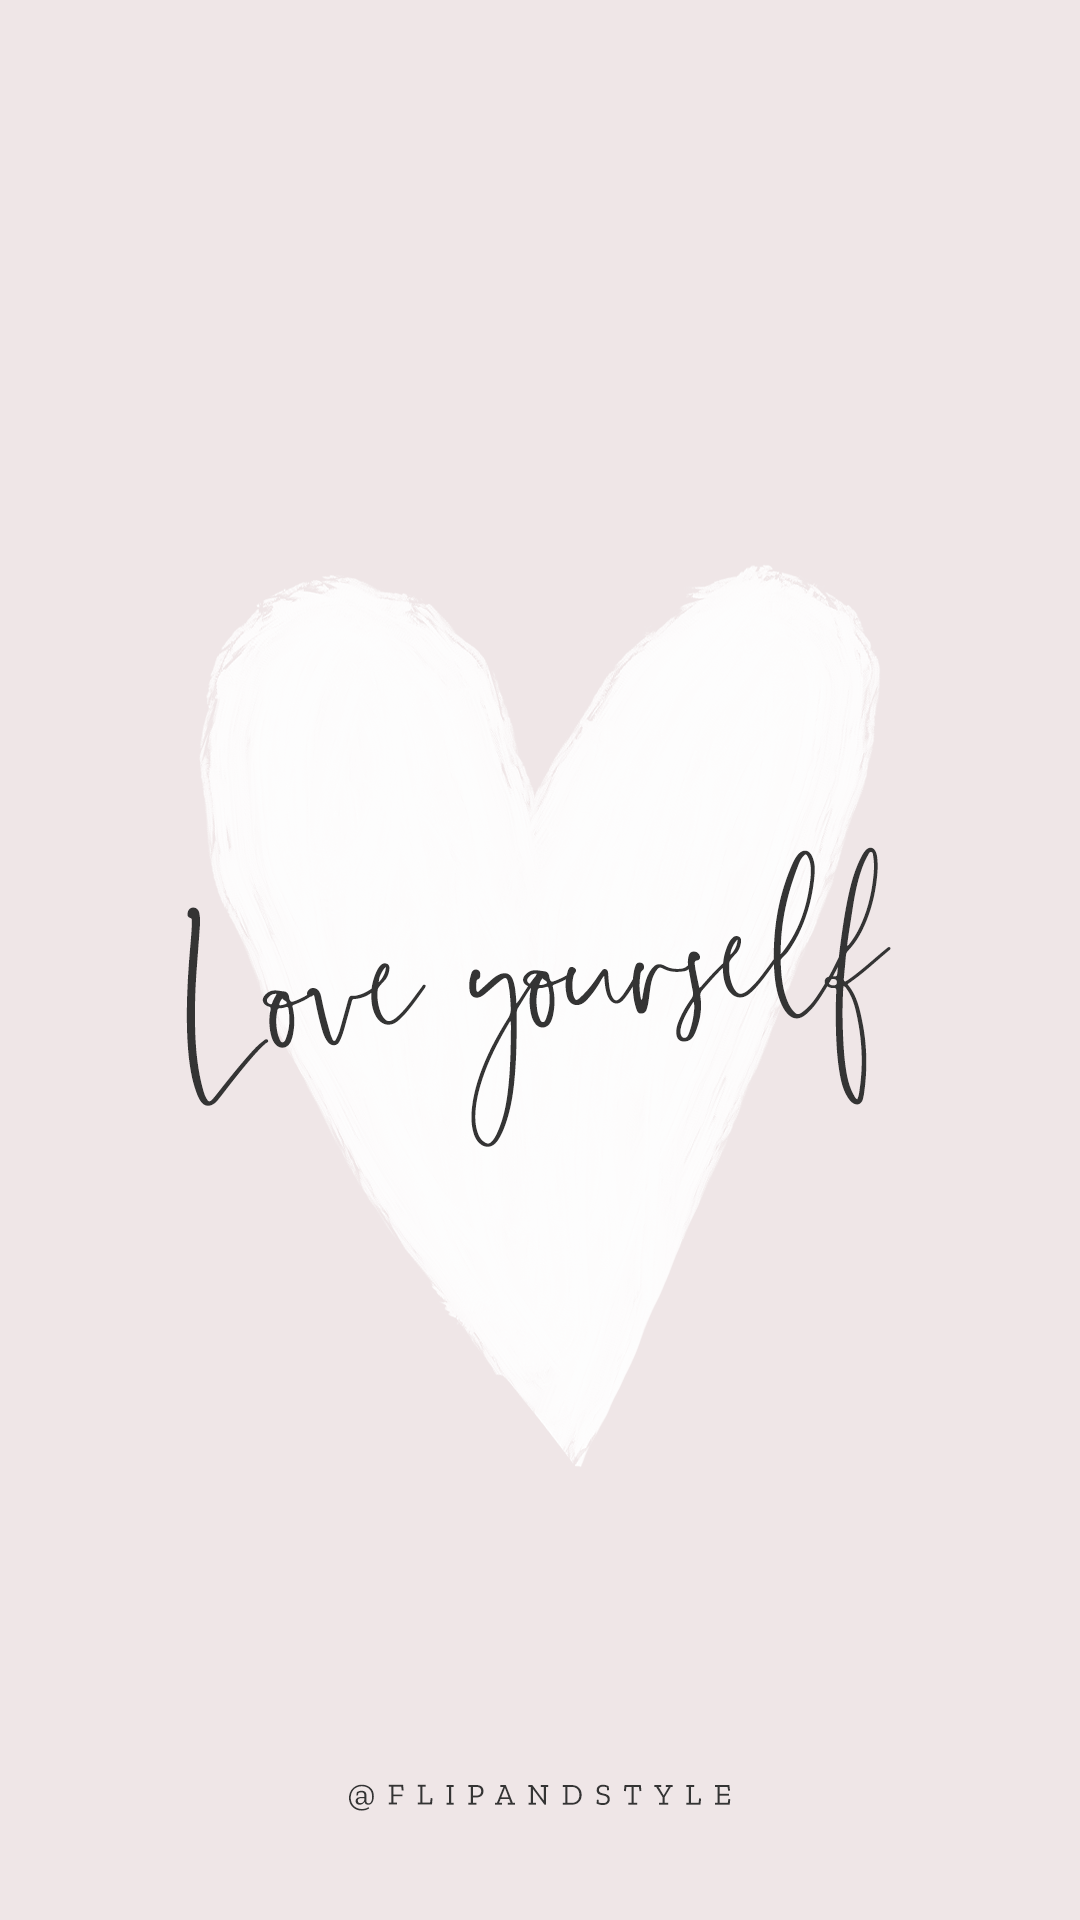 Free download Love yourself pink iphone background wallpaper words [1080x1920] for your Desktop, Mobile & Tablet. Explore Pink Love Quotes Wallpaper. Pink Love Quotes Wallpaper, Love Wallpaper Quotes, Love Quotes Wallpaper